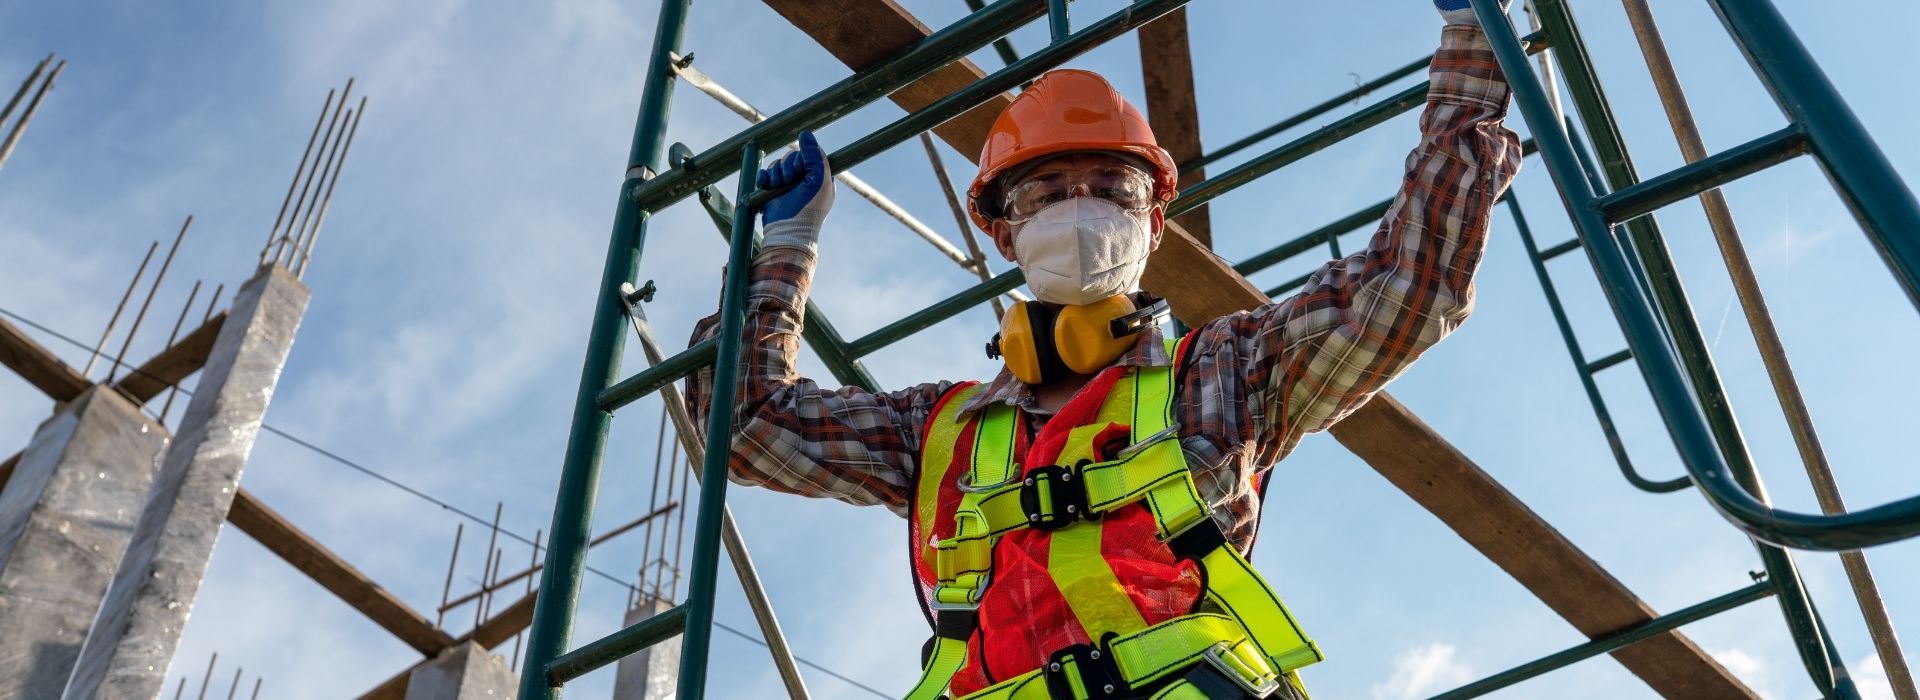 Ensuring Work at Height Safety: Best Practices and Regulations